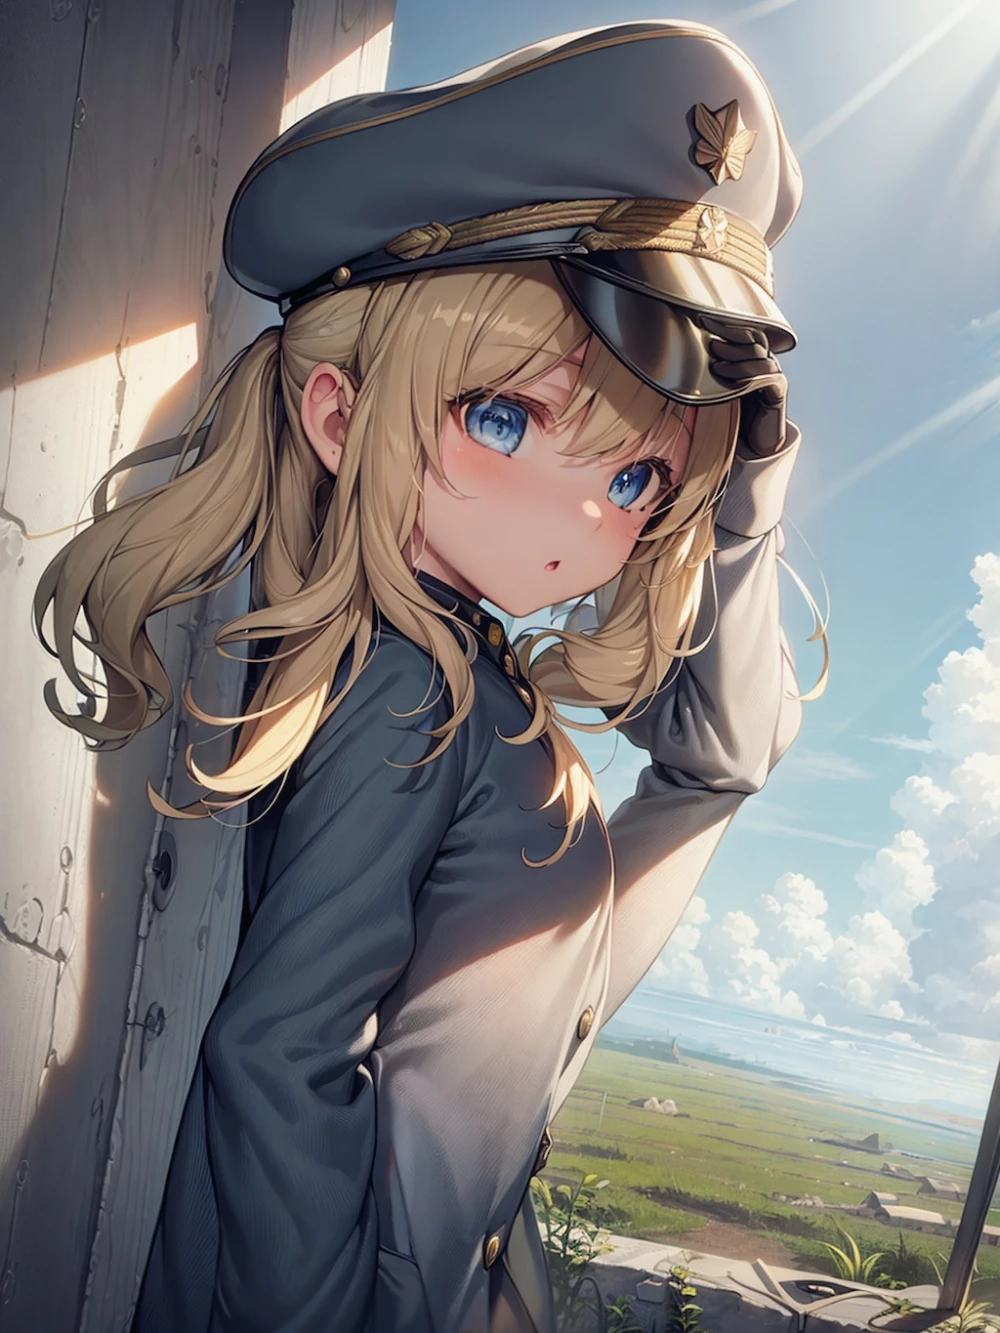 military-uniform-anime-style-all-ages-10